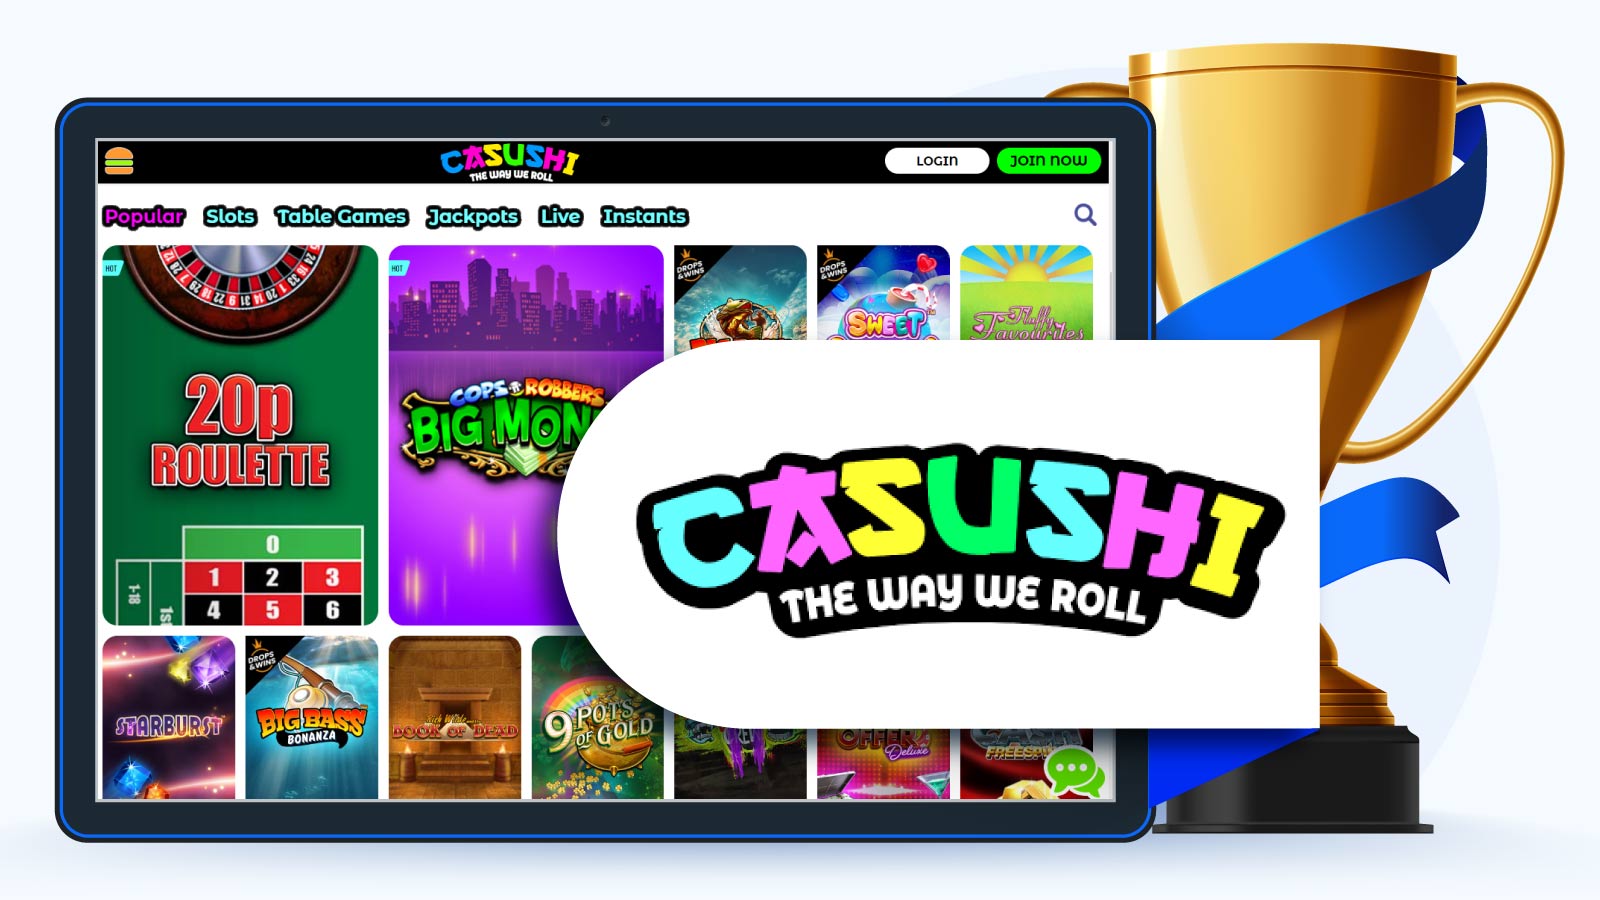 Casushi Casino – Must-Pick For Skrill Users